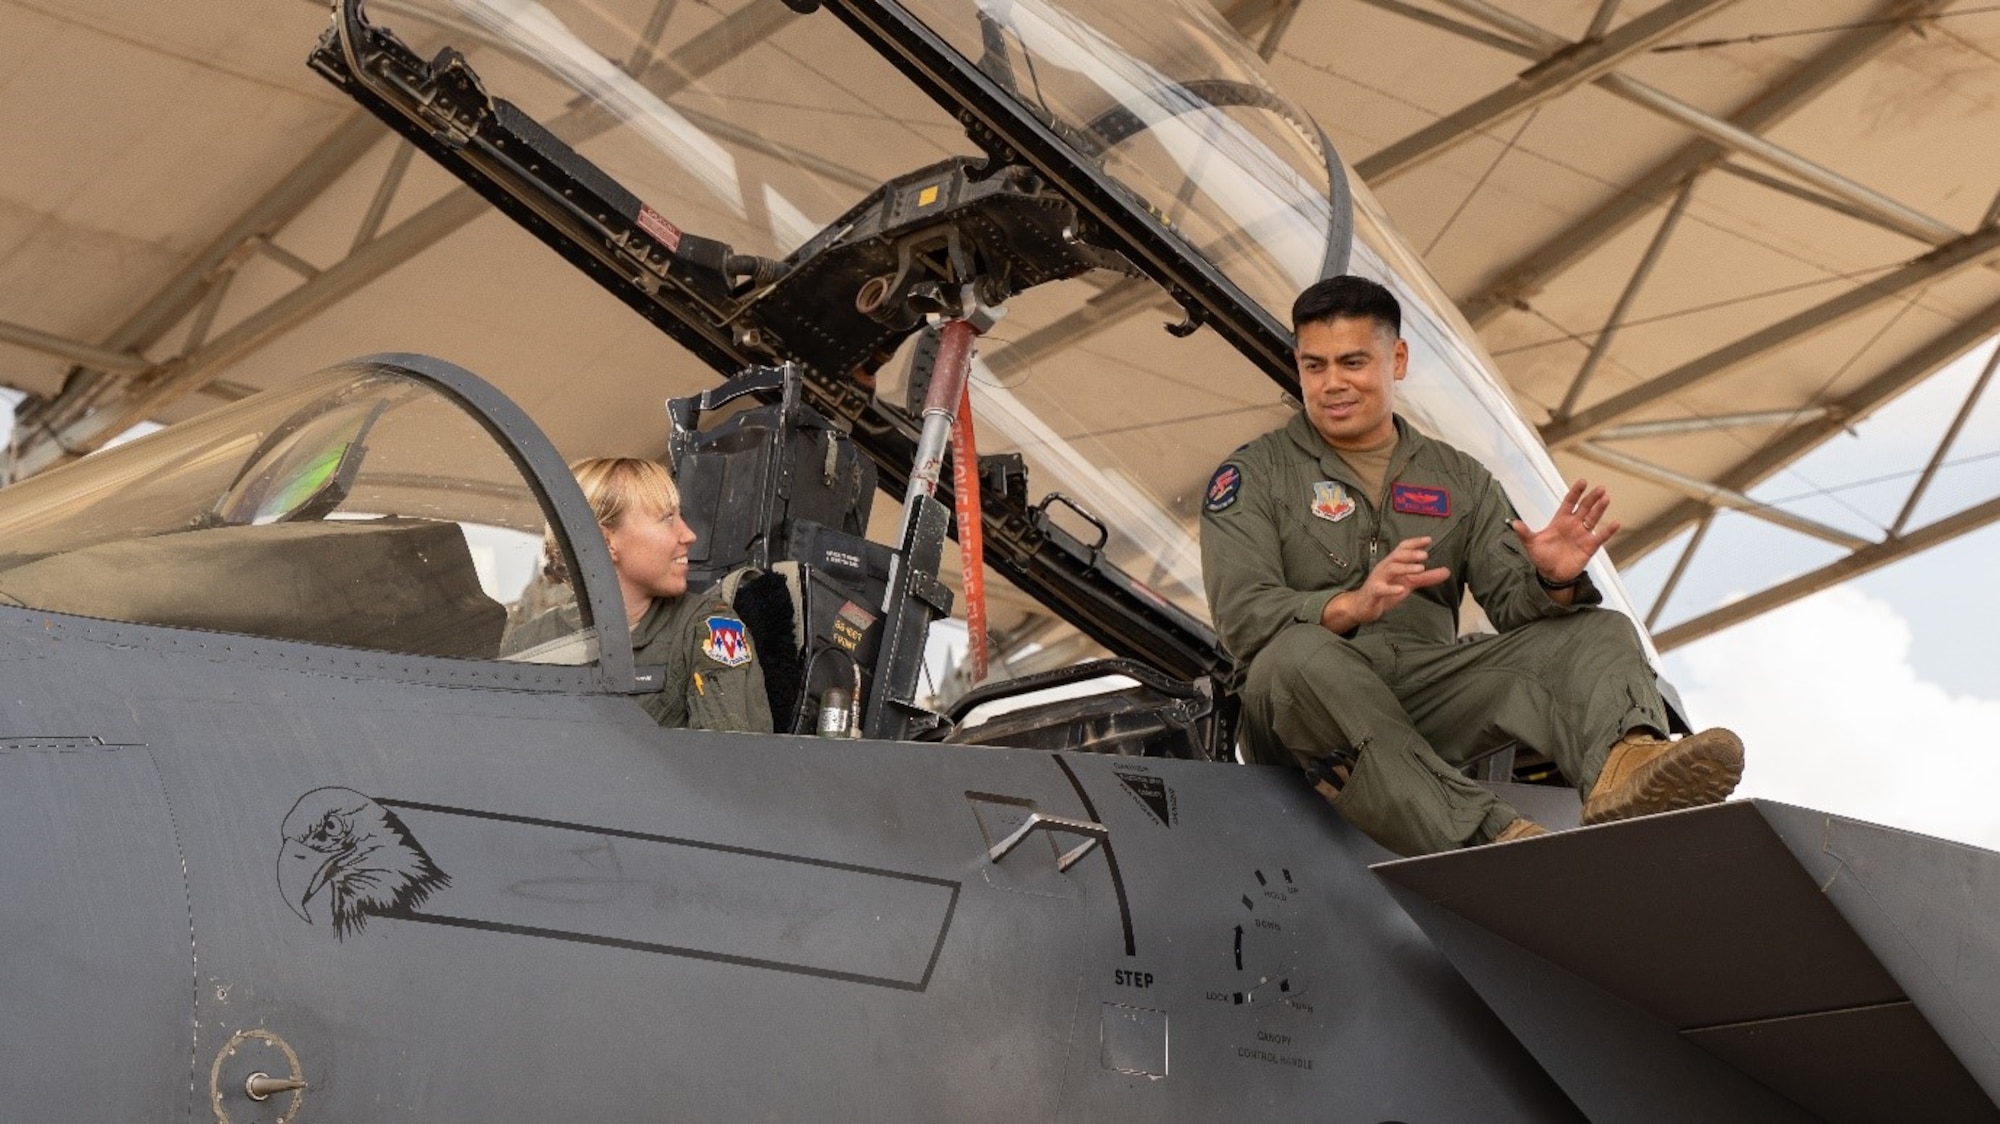 Lt. Col. Roderick “Brick” James, 389th Fighter Squadron commander, speaks to a student pilot from the 71st Flying Training Wing at Vance AFB, OK. (U.S. Air Force photo by Maj. Mark Calendine)